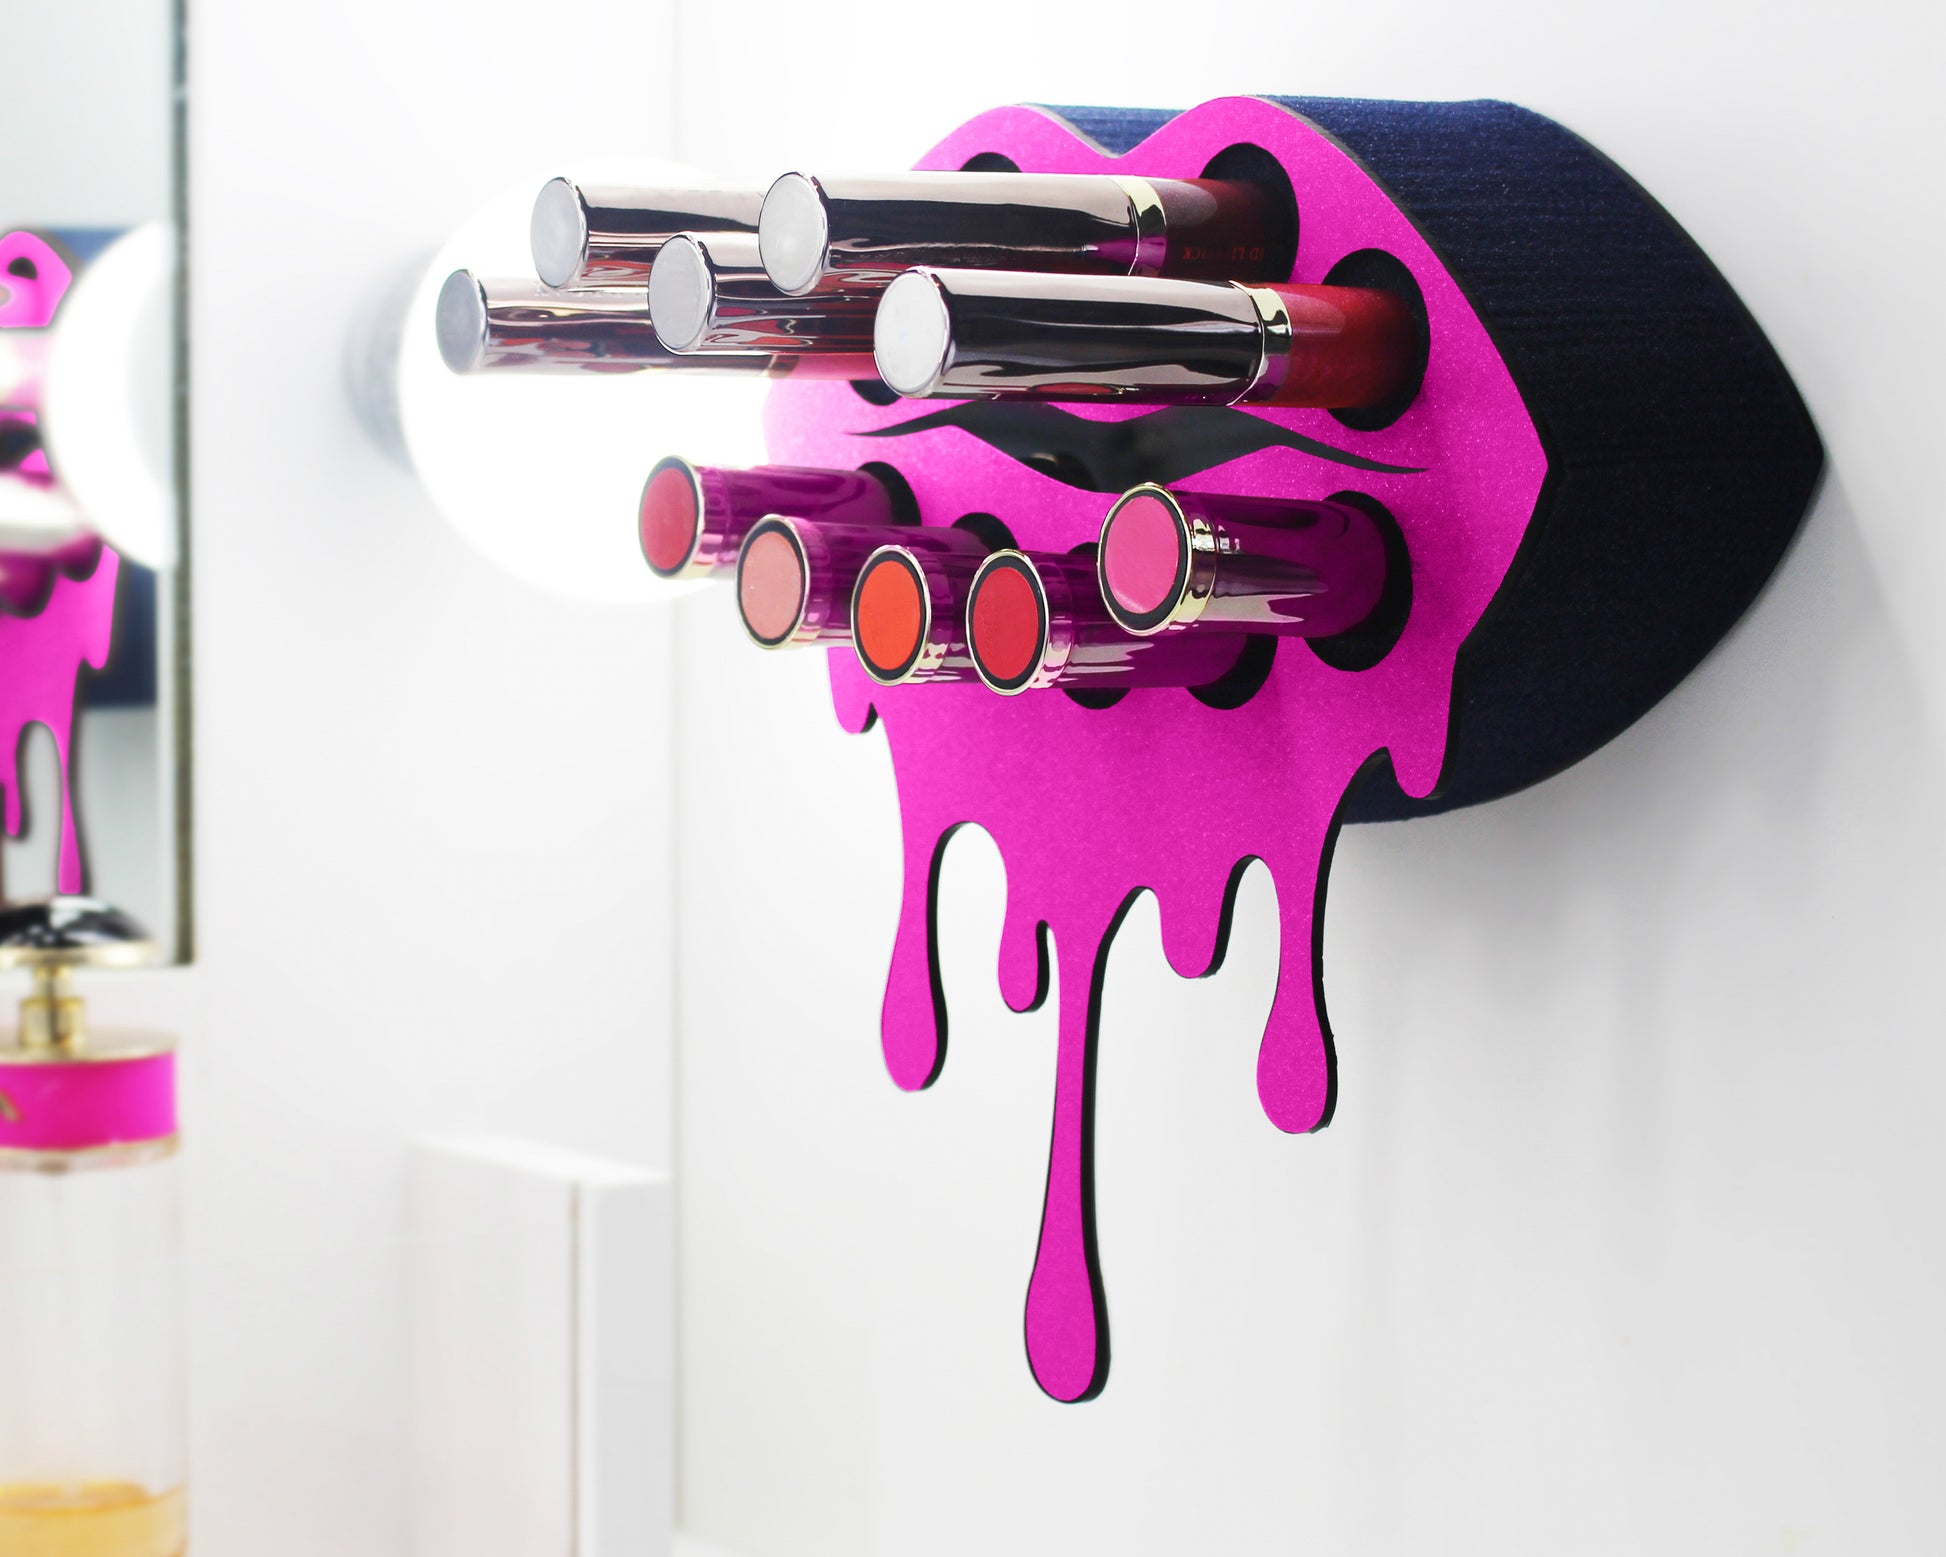 Black Small Lip Design Lipstick Organizer holding 10 lipsticks mounted on the wall with lipstick easily accessible and organized. Hanging Lipstick Holder that looks like wall art.